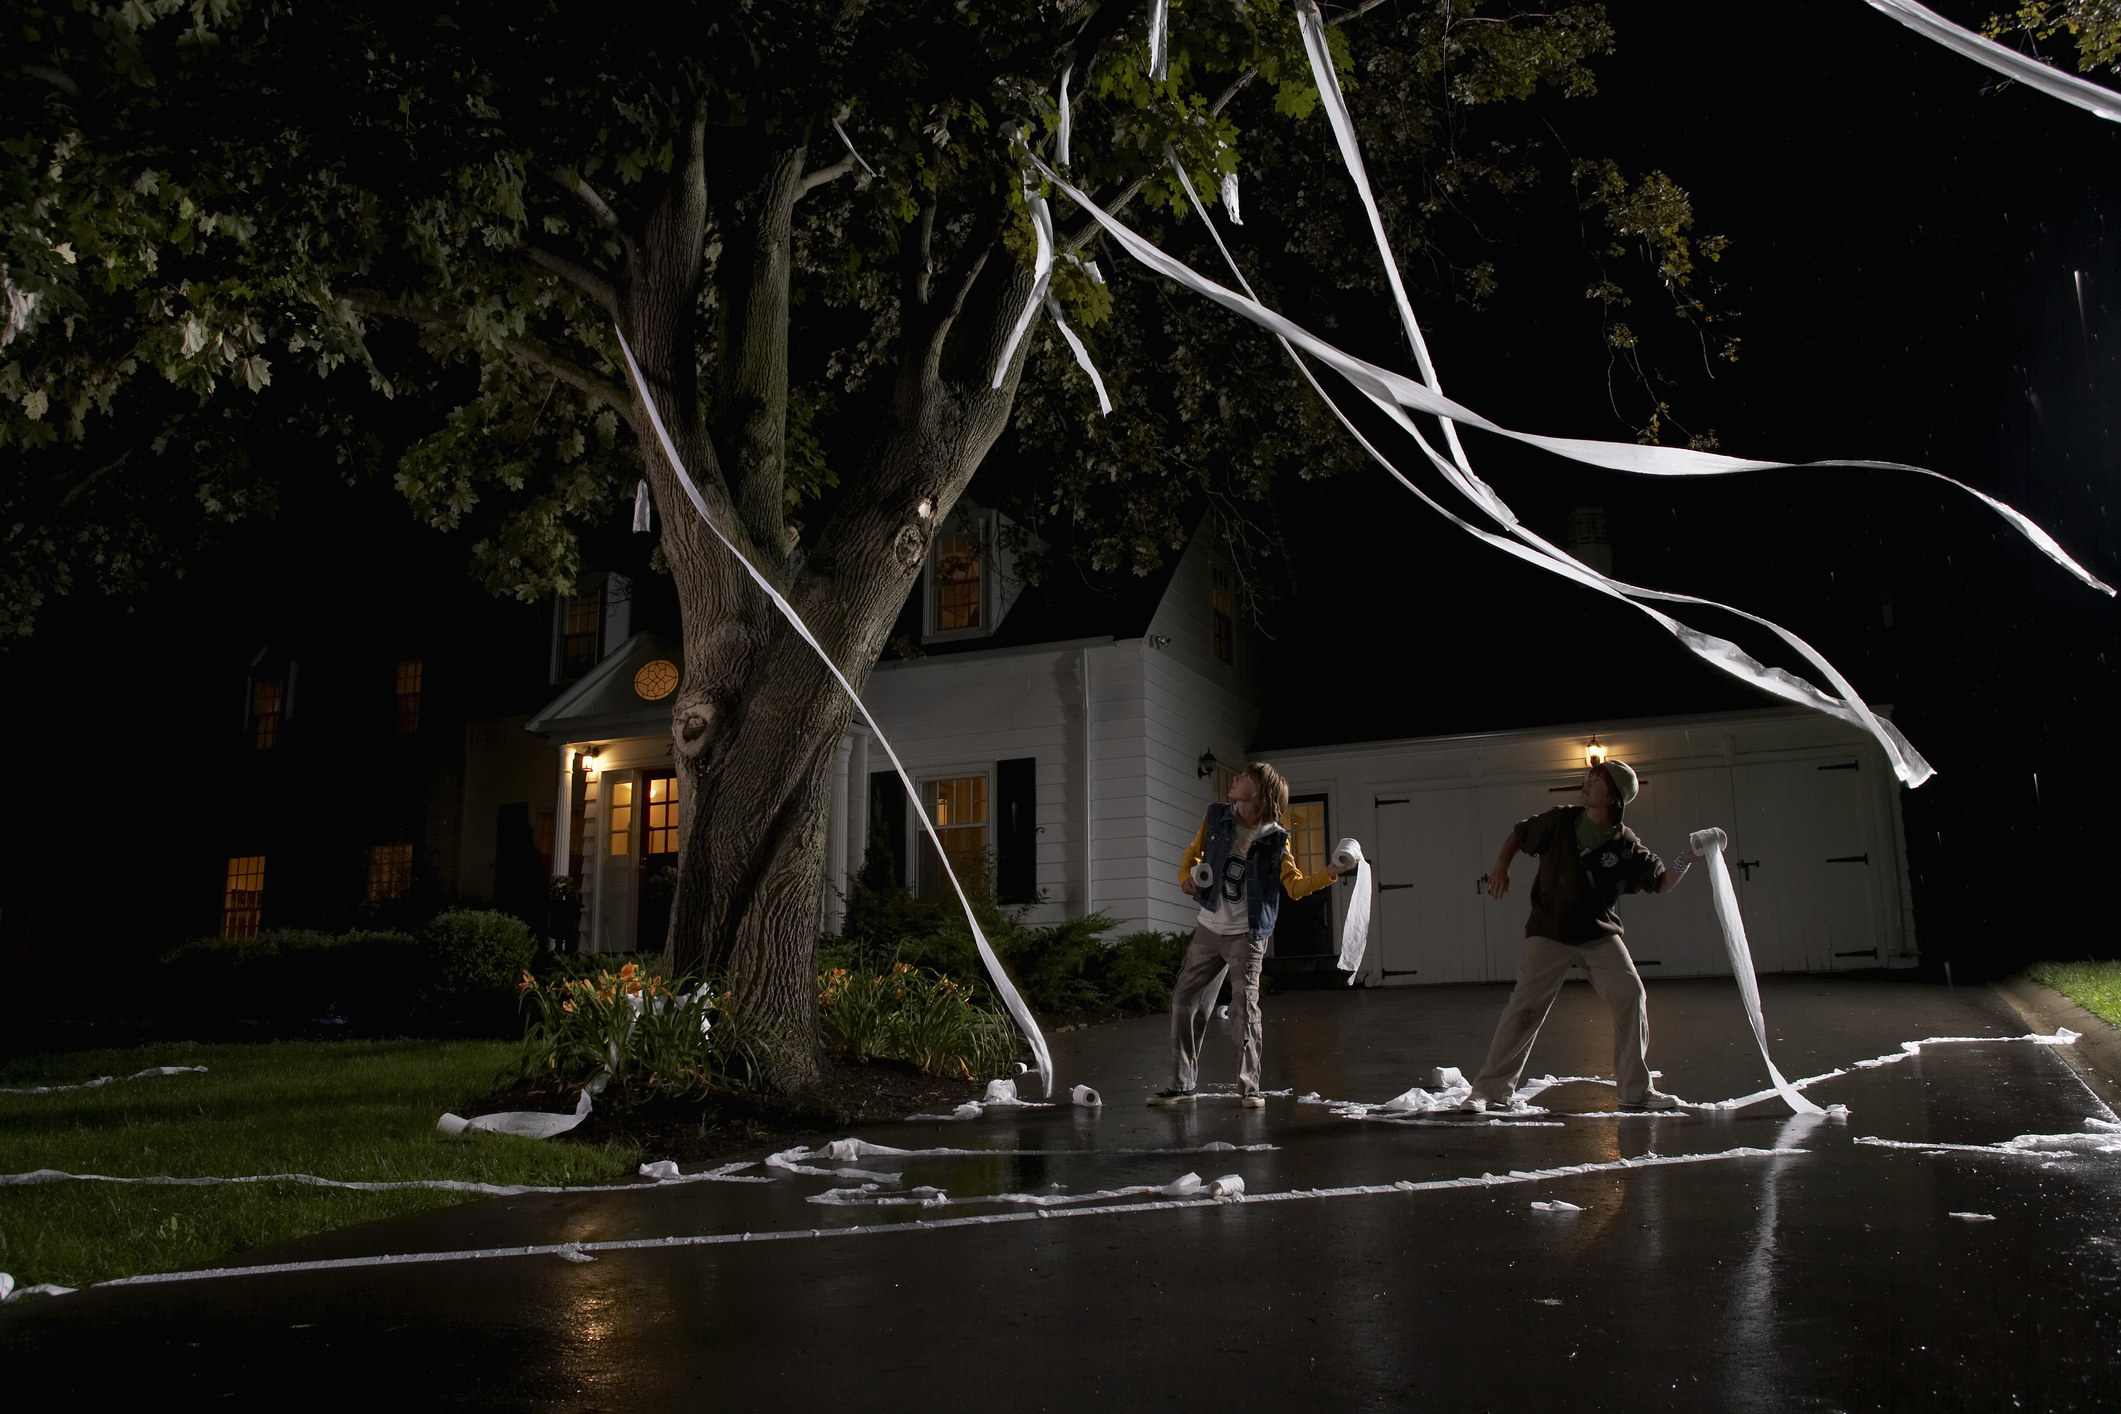 People throwing TP on a tree outside of a house